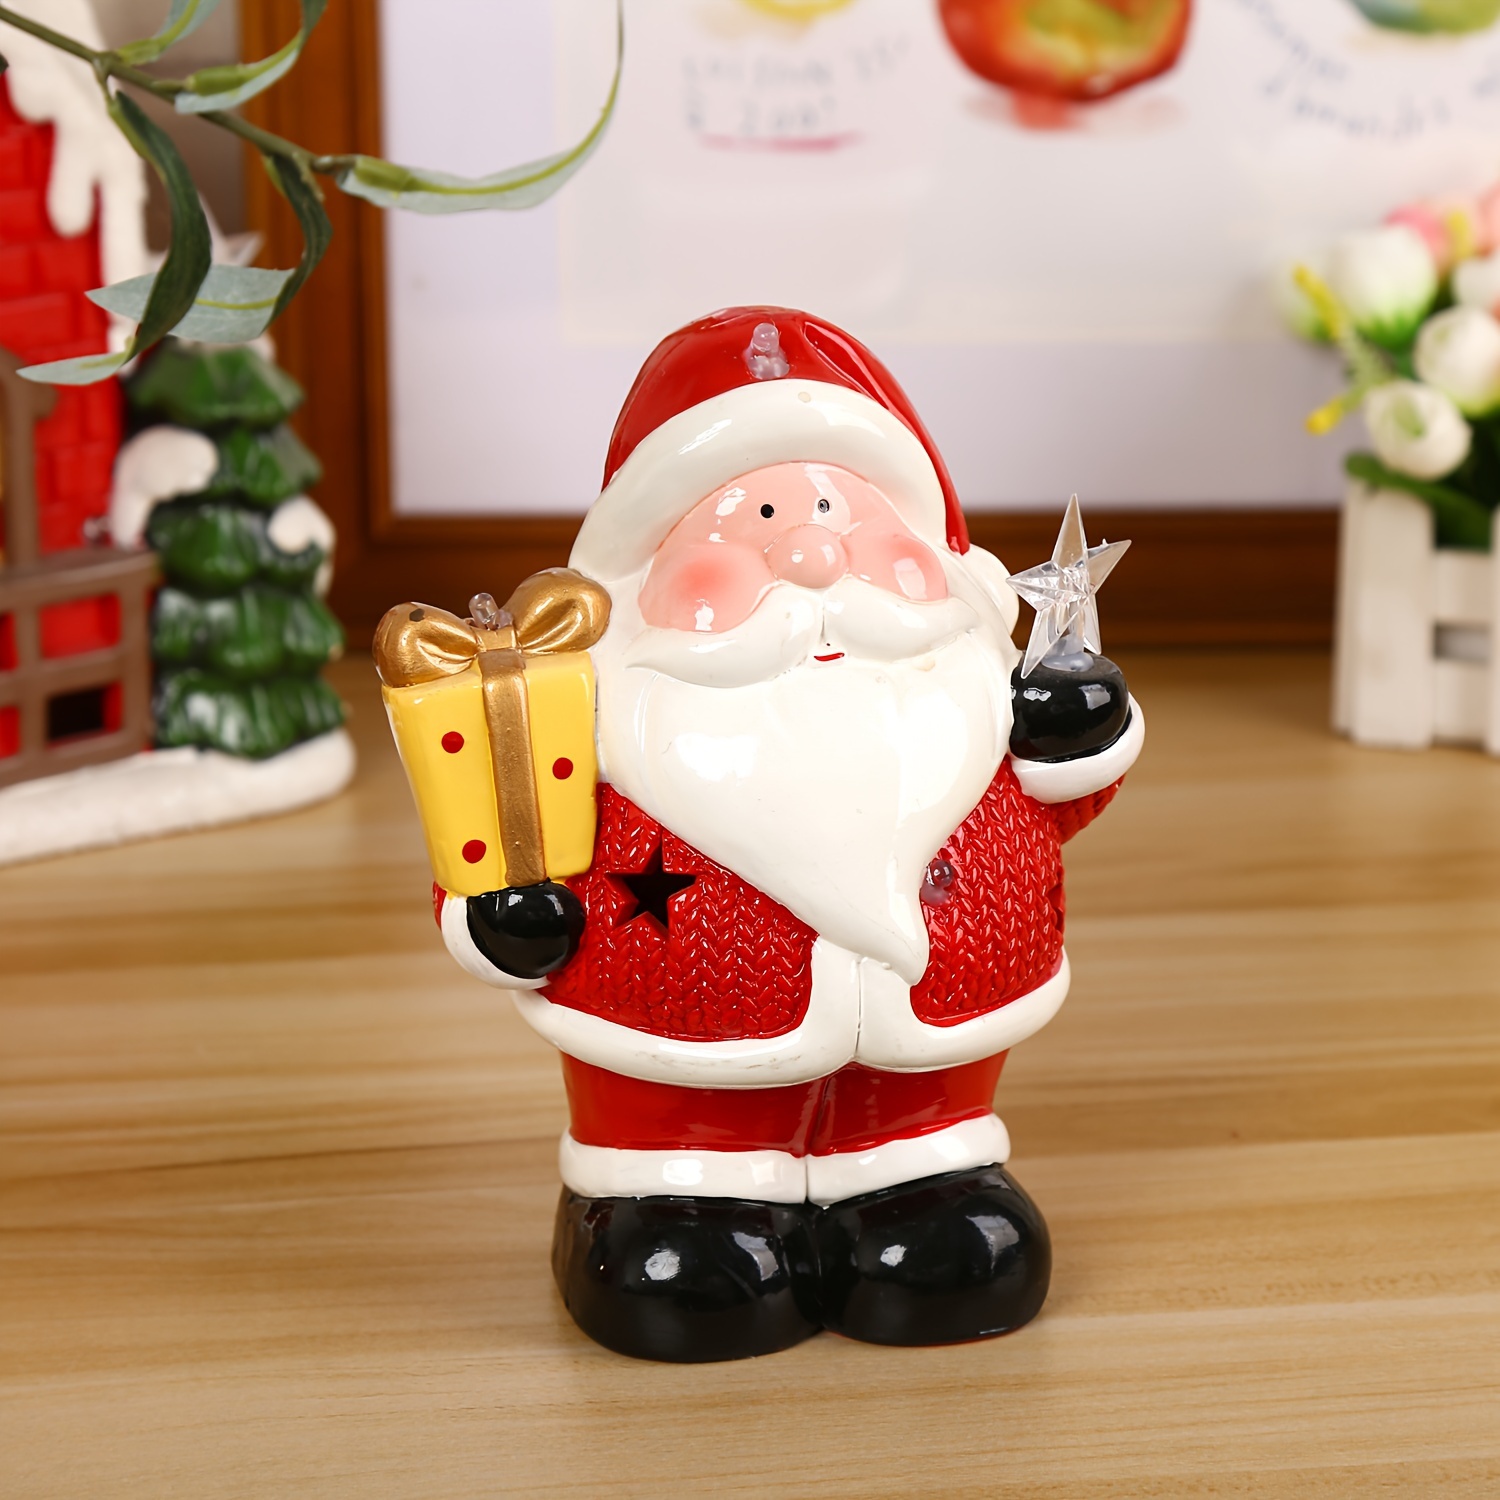 

Santa Claus/snowman Vintage Ceramic Decoration With Led Lights For Dormitory Christmas Party Wedding Valentine's Day Decoration, H 18.5 Cm/7.3 Inches